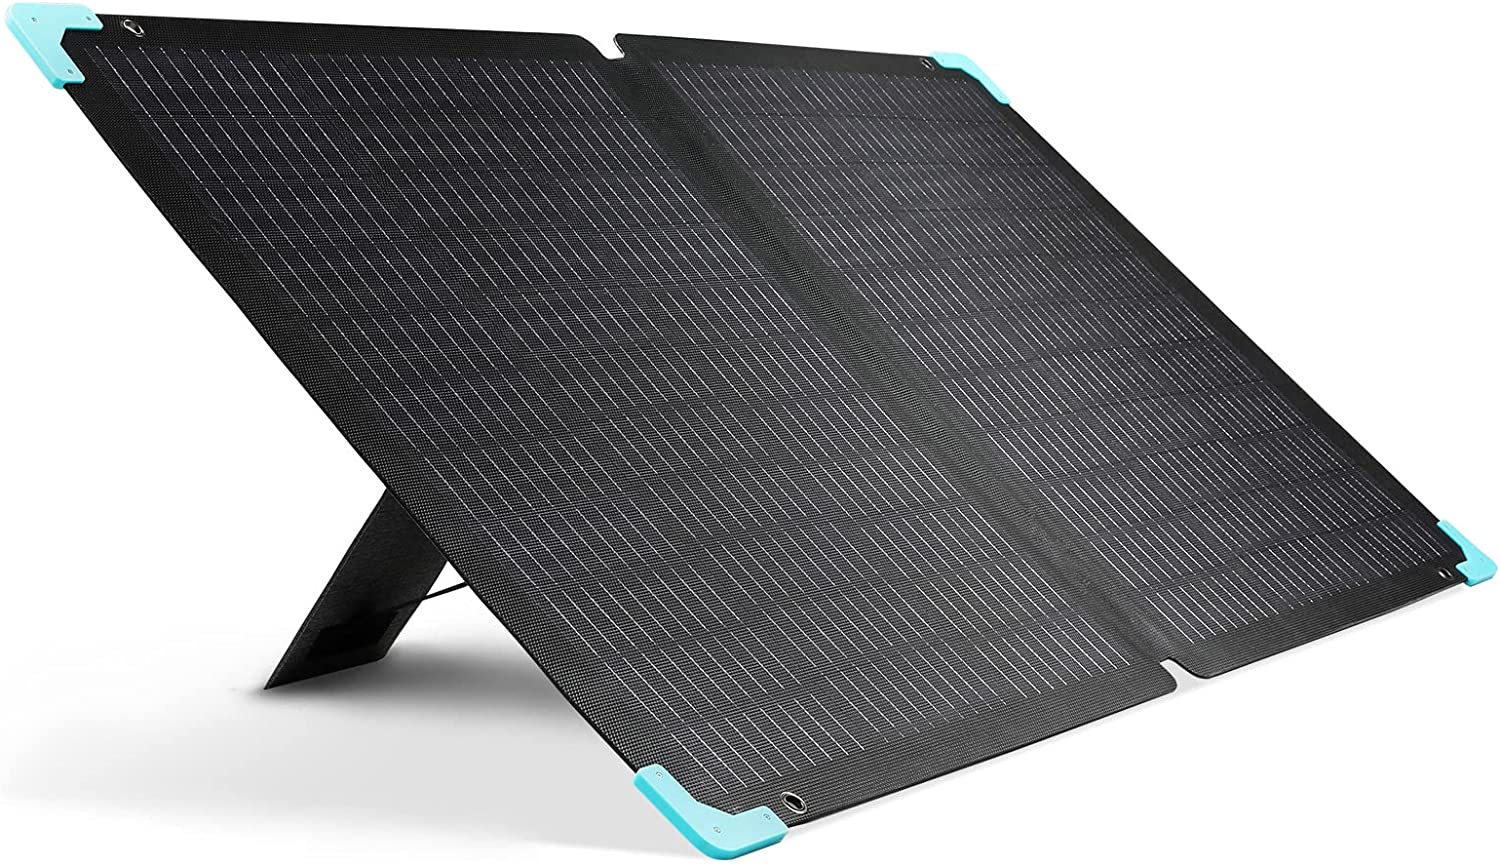 Renogy 120W Portable Solar Panel for Power Station, Foldable Renewable Energy Charger, Off Grid Systems for Camping/Short Trip/Fishing, E.Flex 120